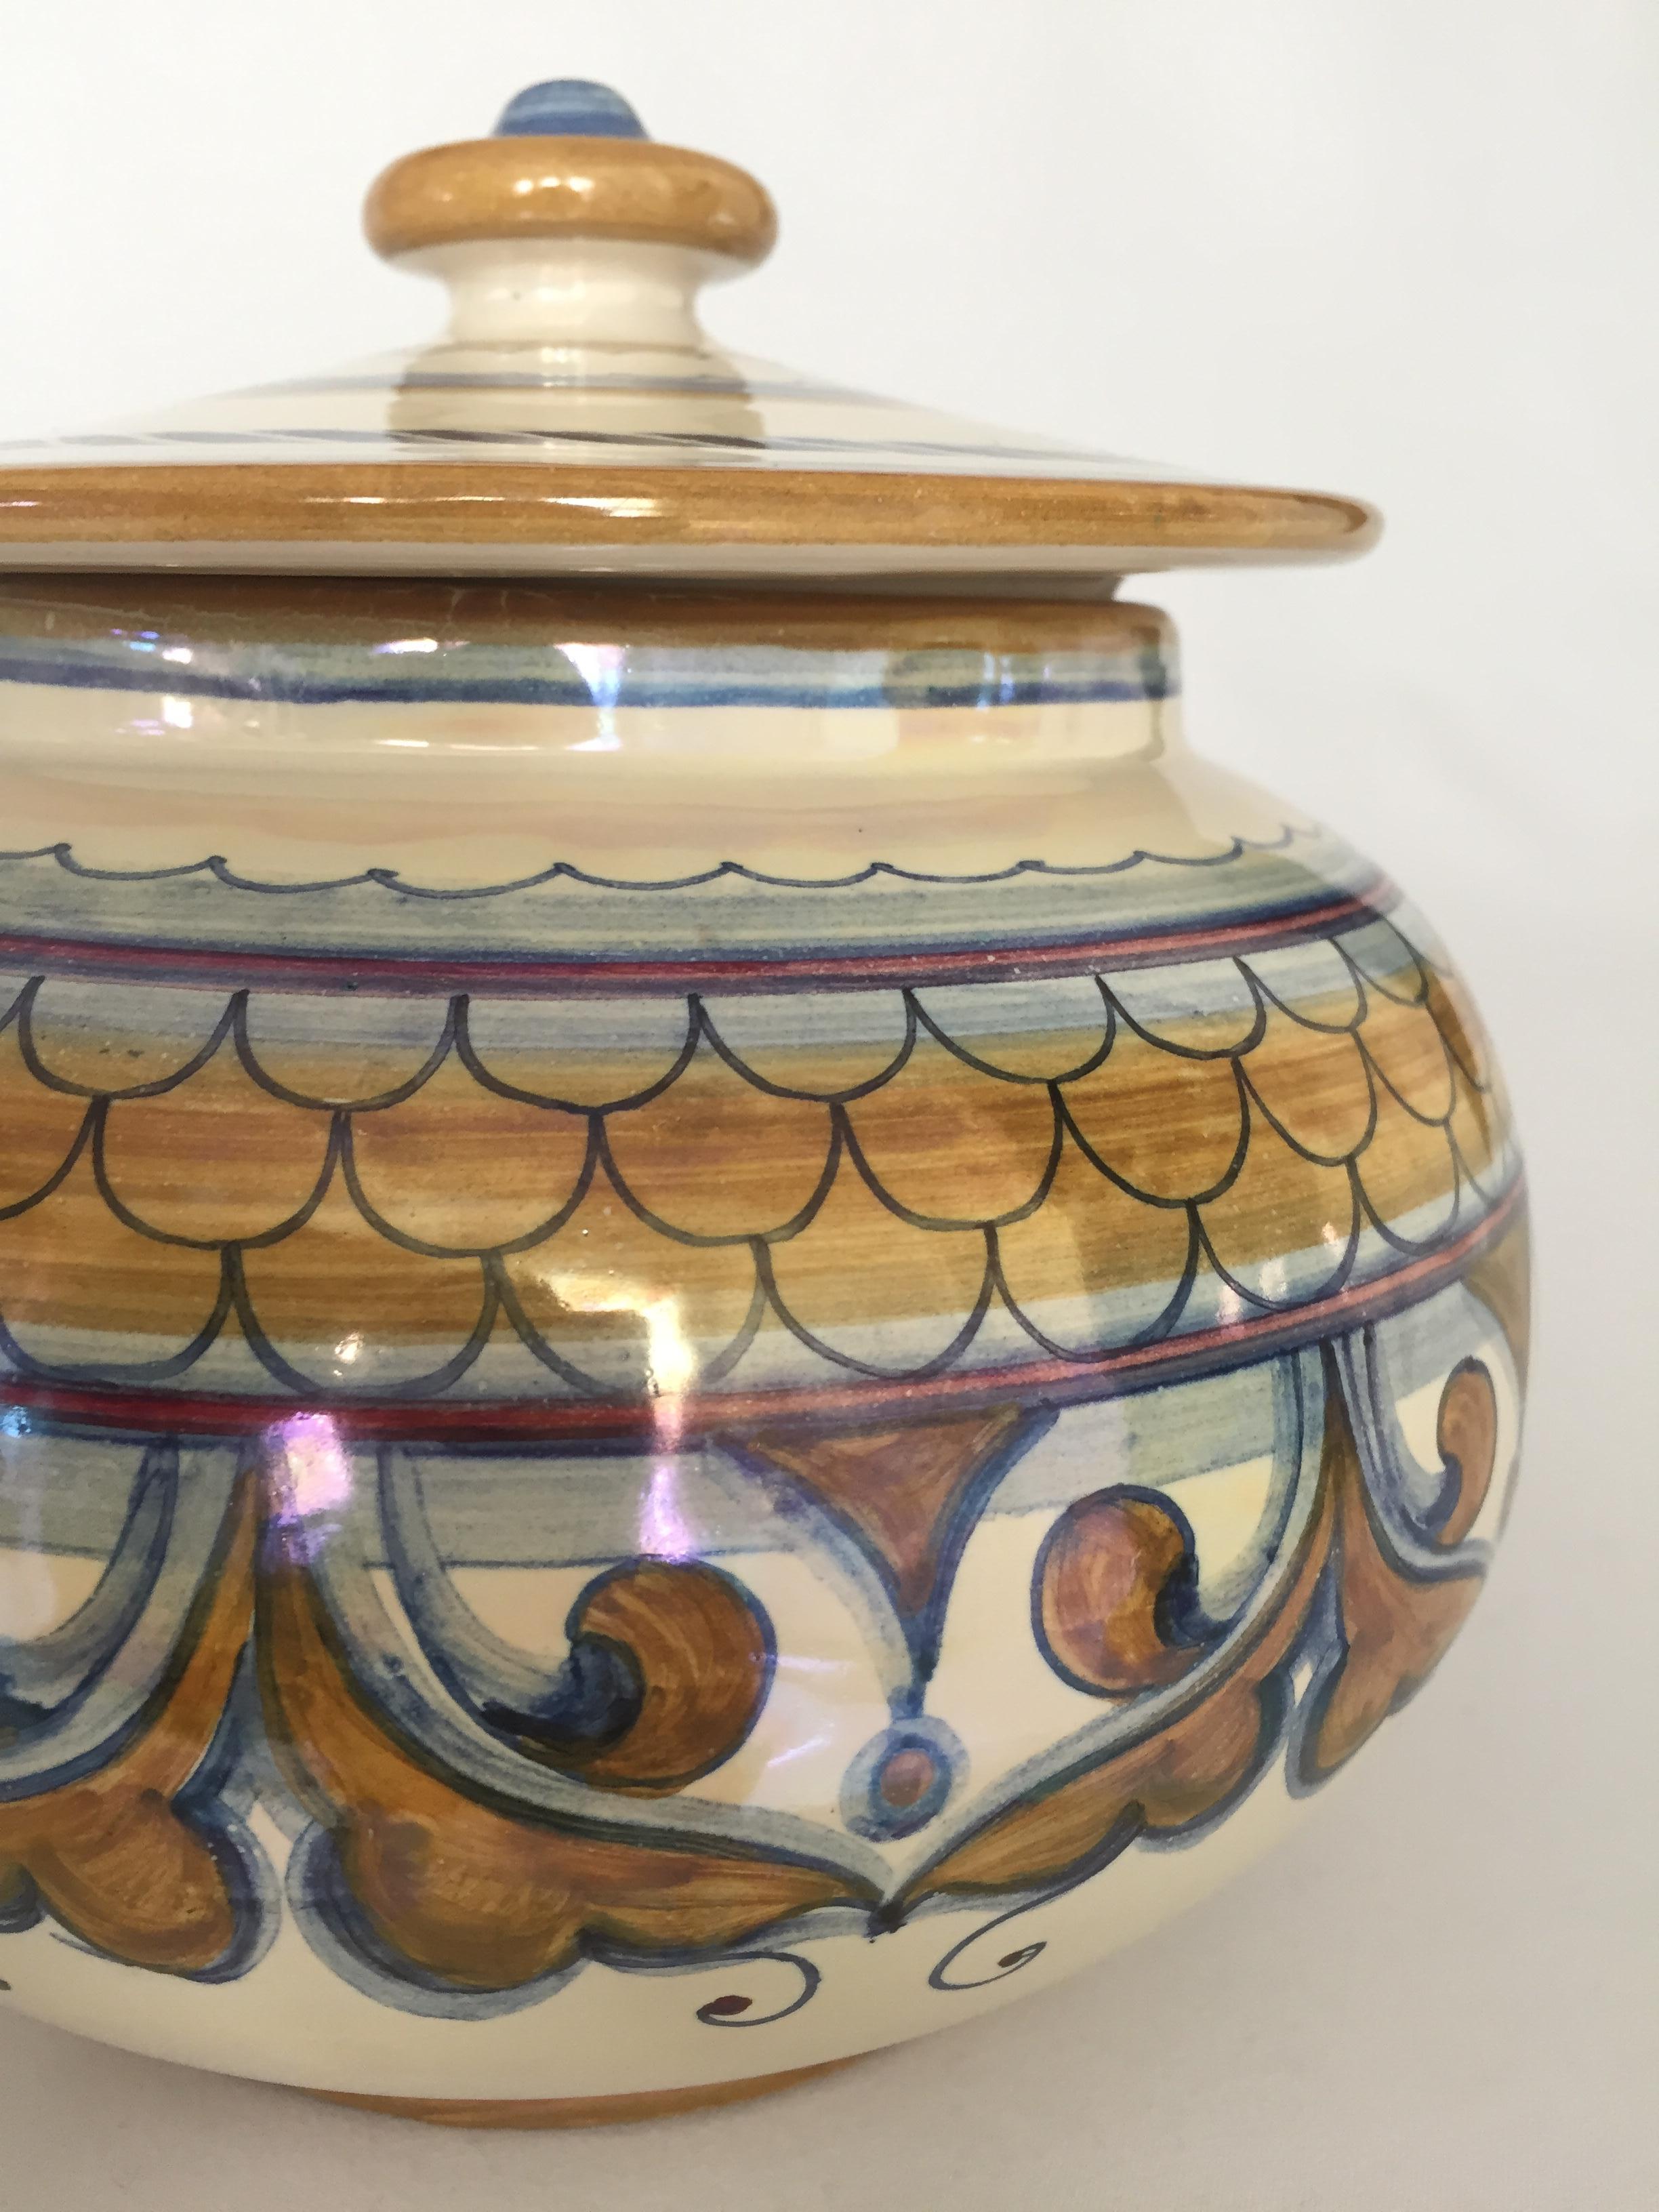 Italian ceramic lidded jar with Majolica glaze, handcrafted by master ceramicist Francesca Niccacci. In 1975, she opened her own studio, Vecchia Deruta.
Her work is featured in many museums and churches worldwide, and greatly influenced by the